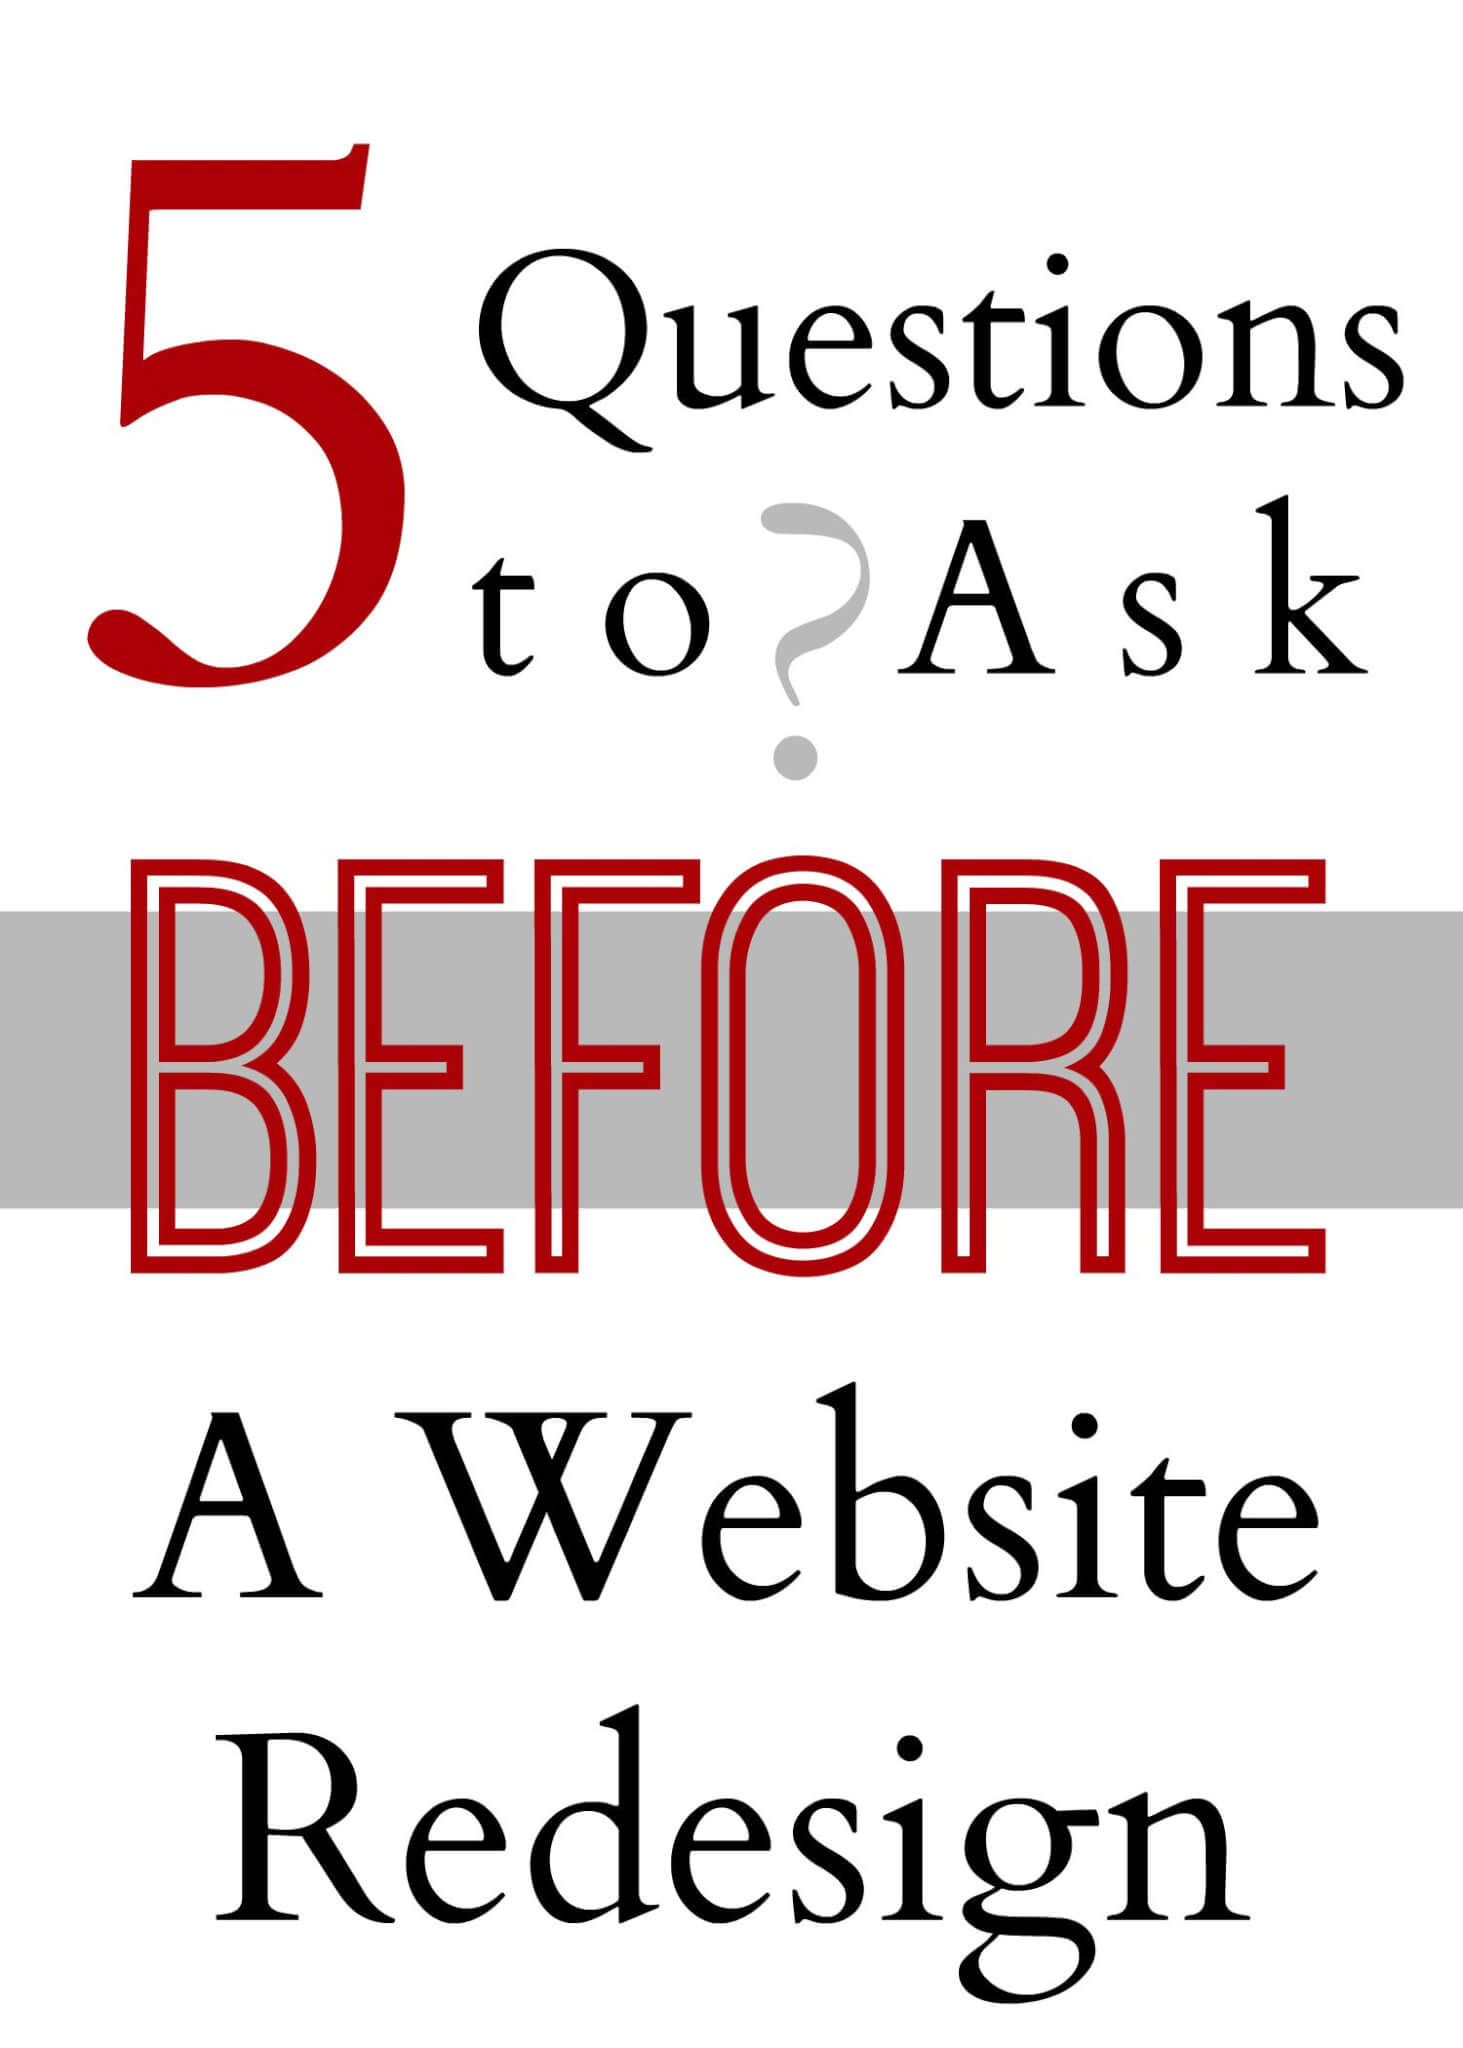 5 questions to ask before a website redesign